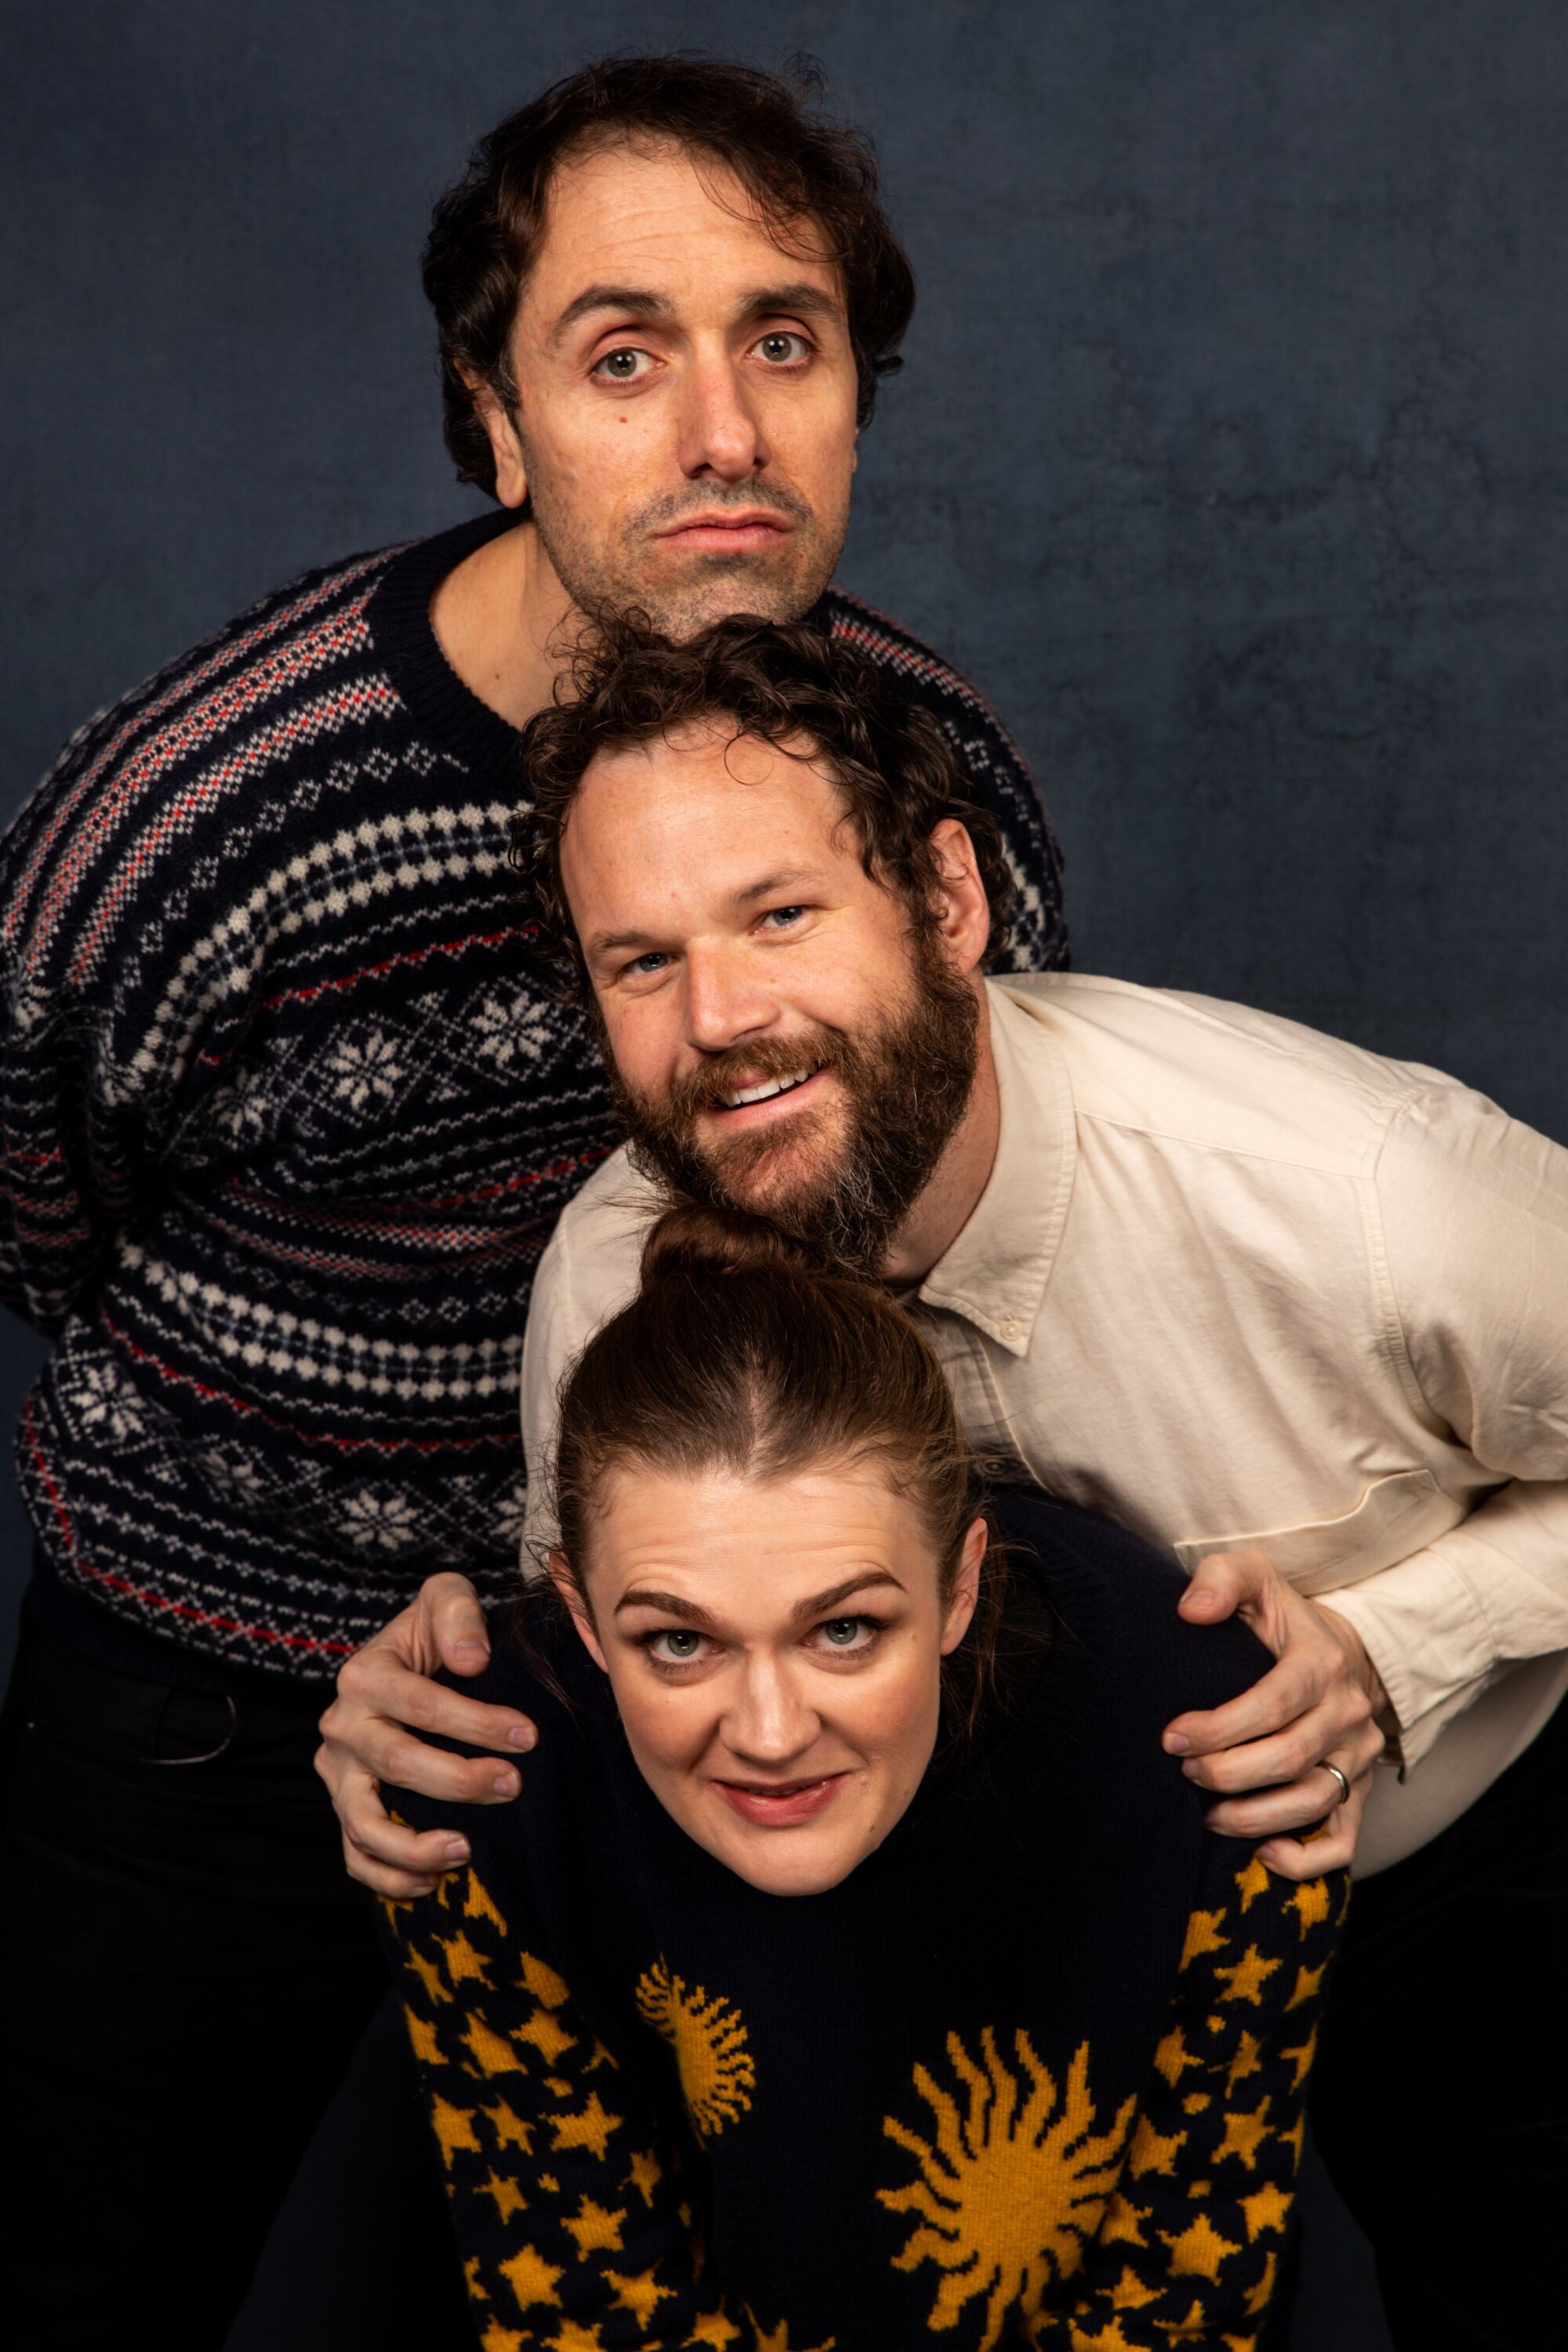 Director-actor-writer Michael Angelo Covino, actor Gayle Rankin and writer-actor Kyle Marvin of “The Climb,” photographed in the L.A. Times Studio at the Sundance Film Festival.